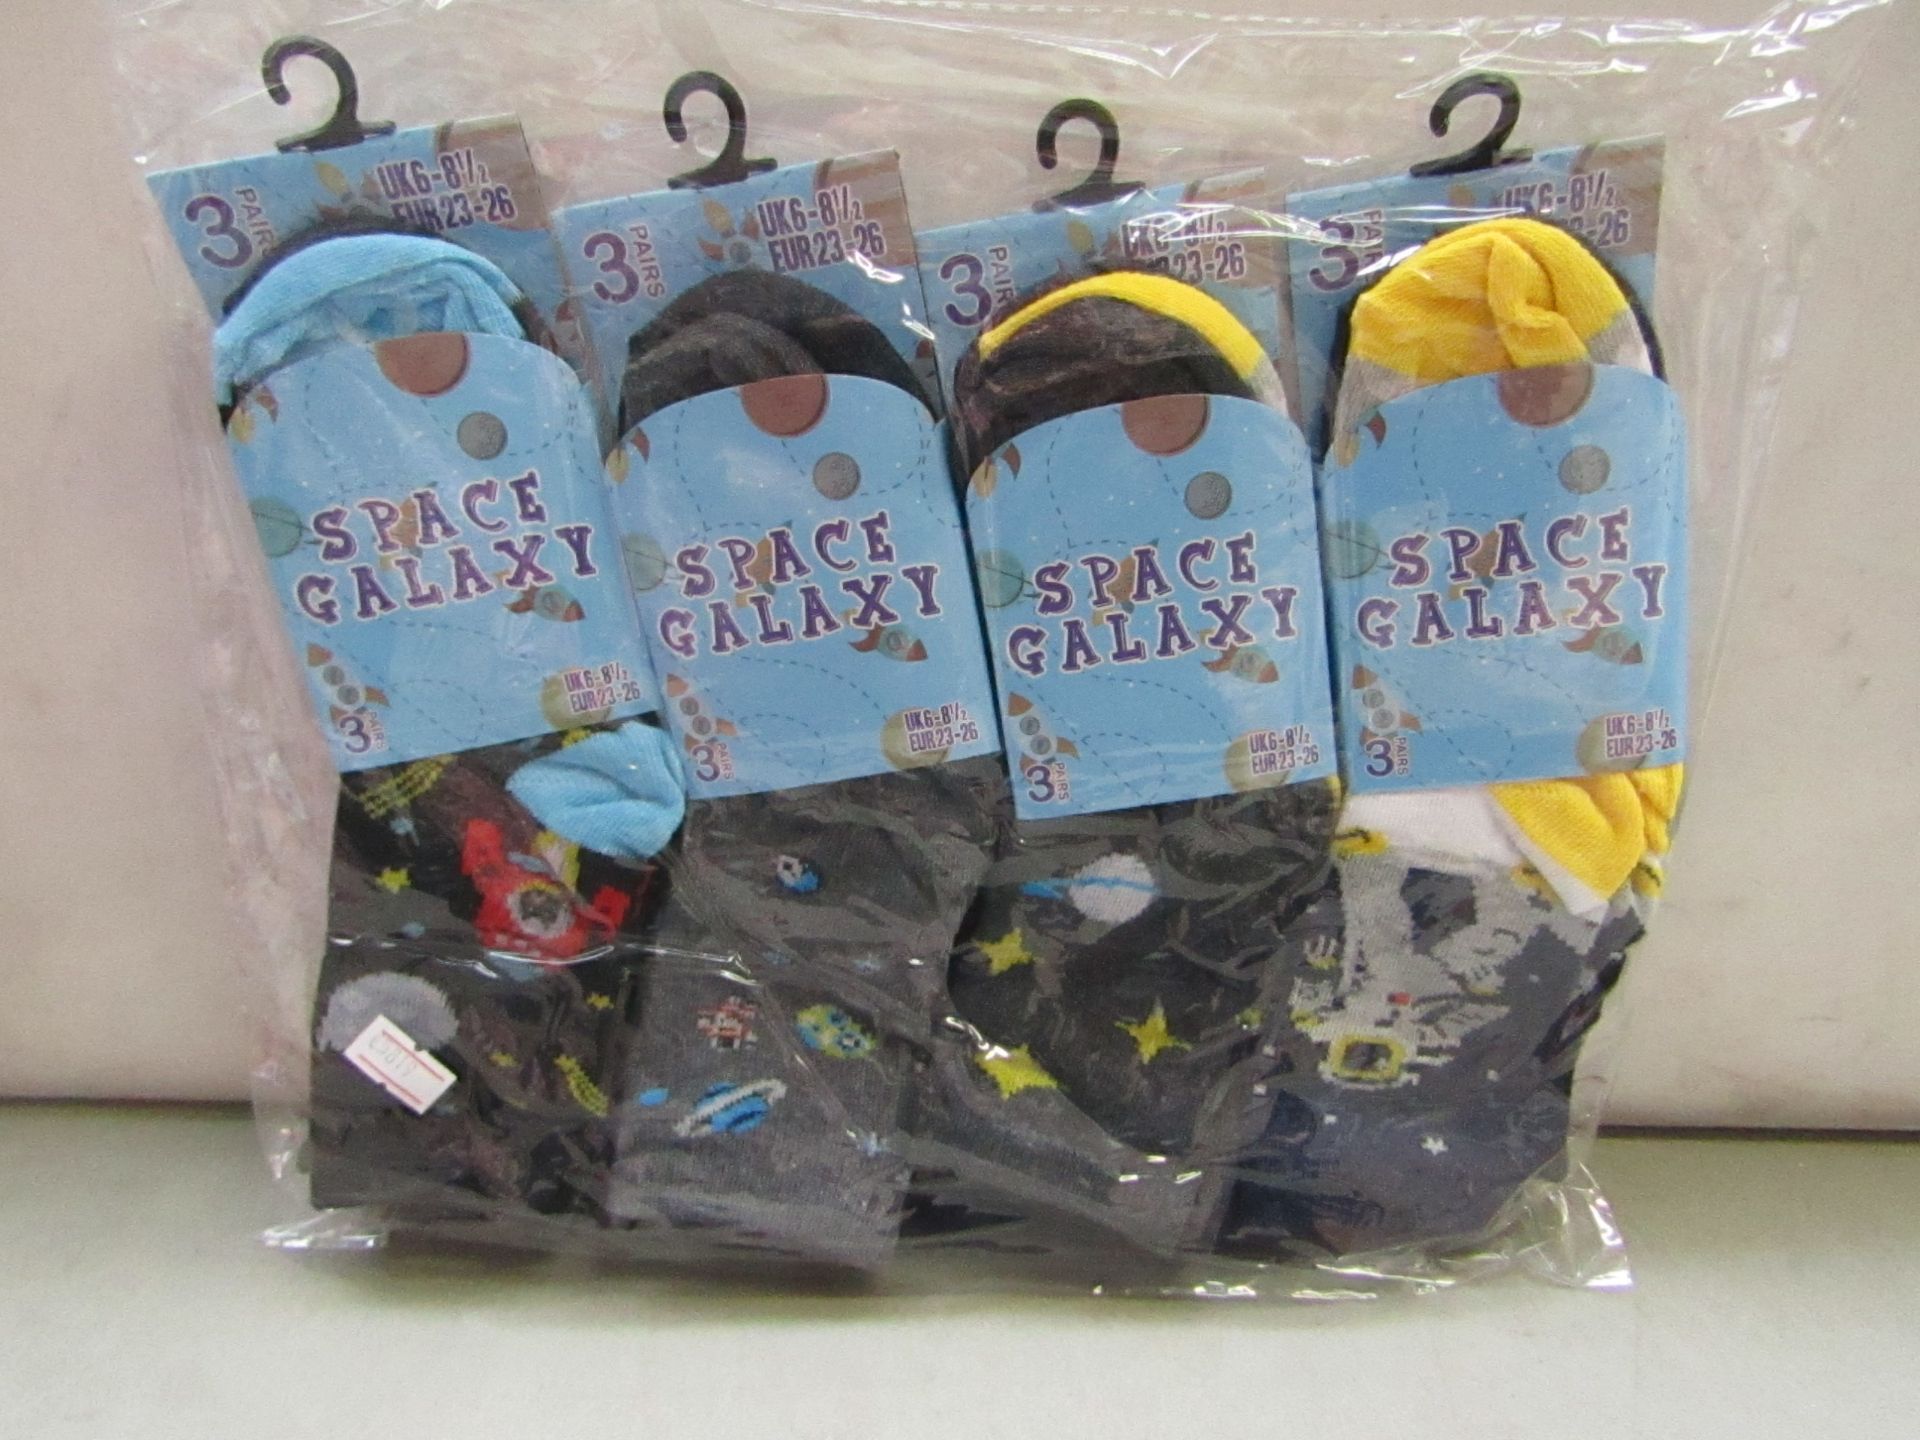 Pack of 12 Childrens Space Galaxy Themed Socks size 6 to 81/2 all new in packaging